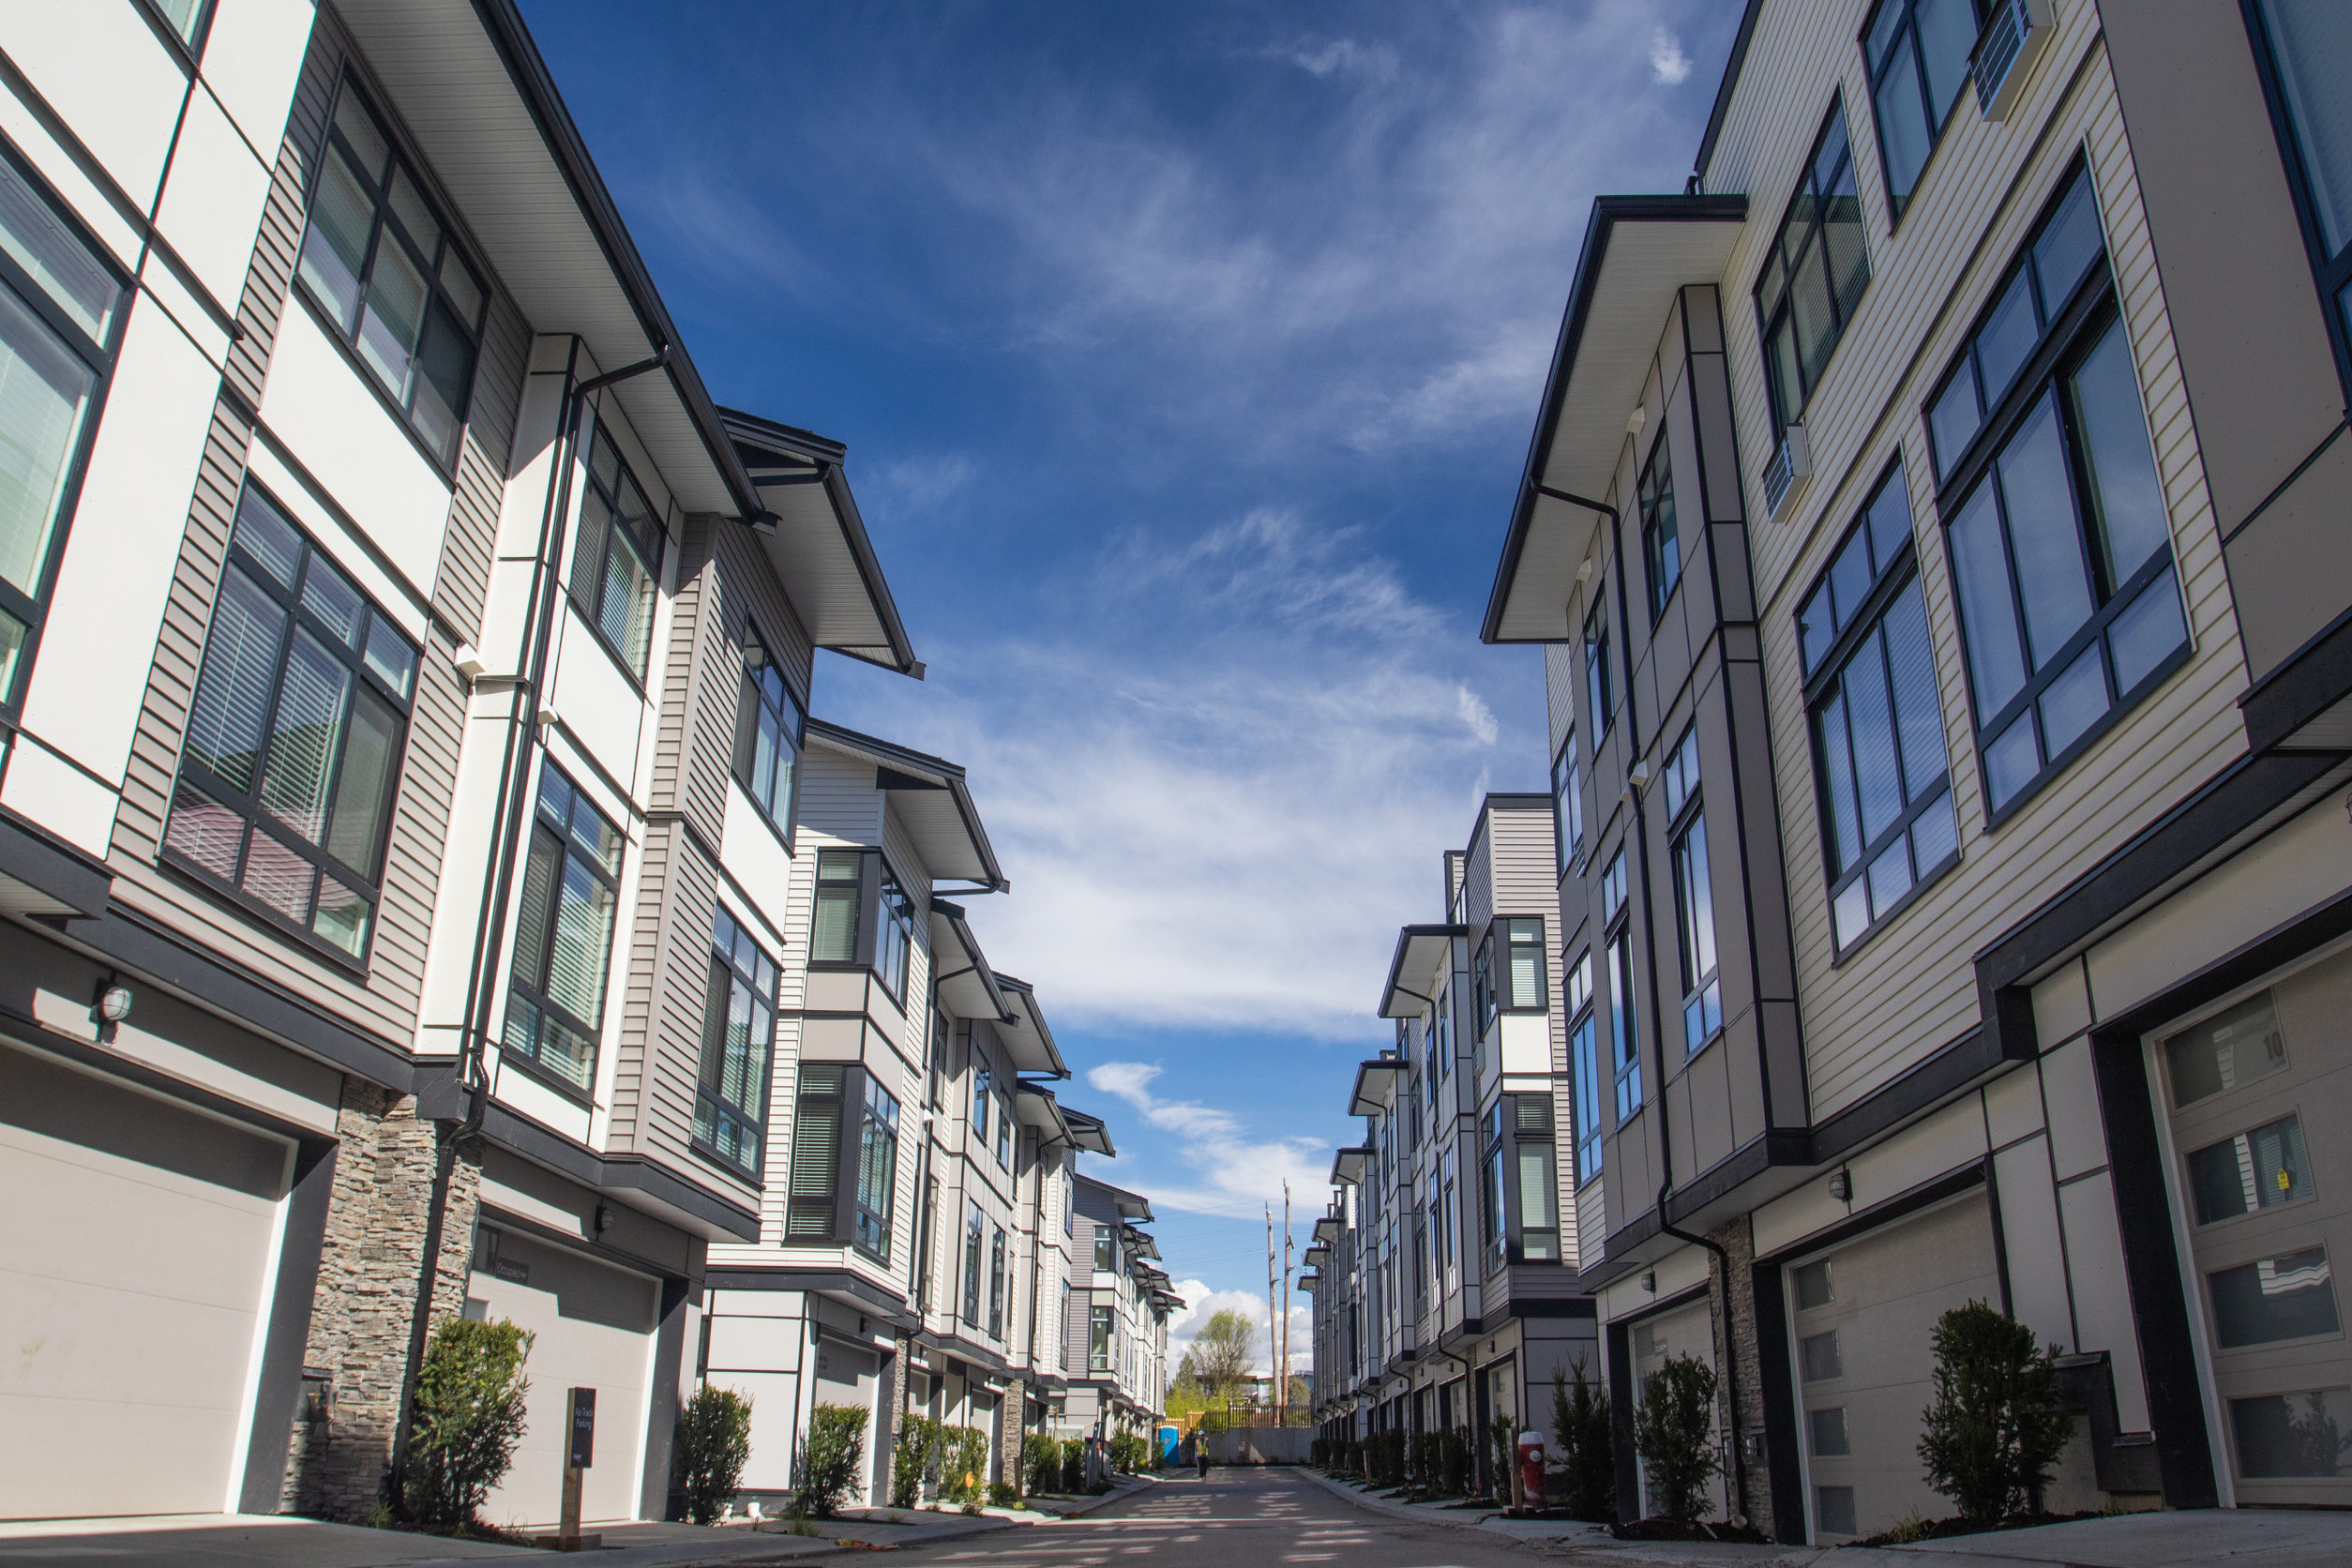 Rows of townhomes side by side. External facade of a row of colorful modern urban townhouses. brand new houses just after construction on real estate market